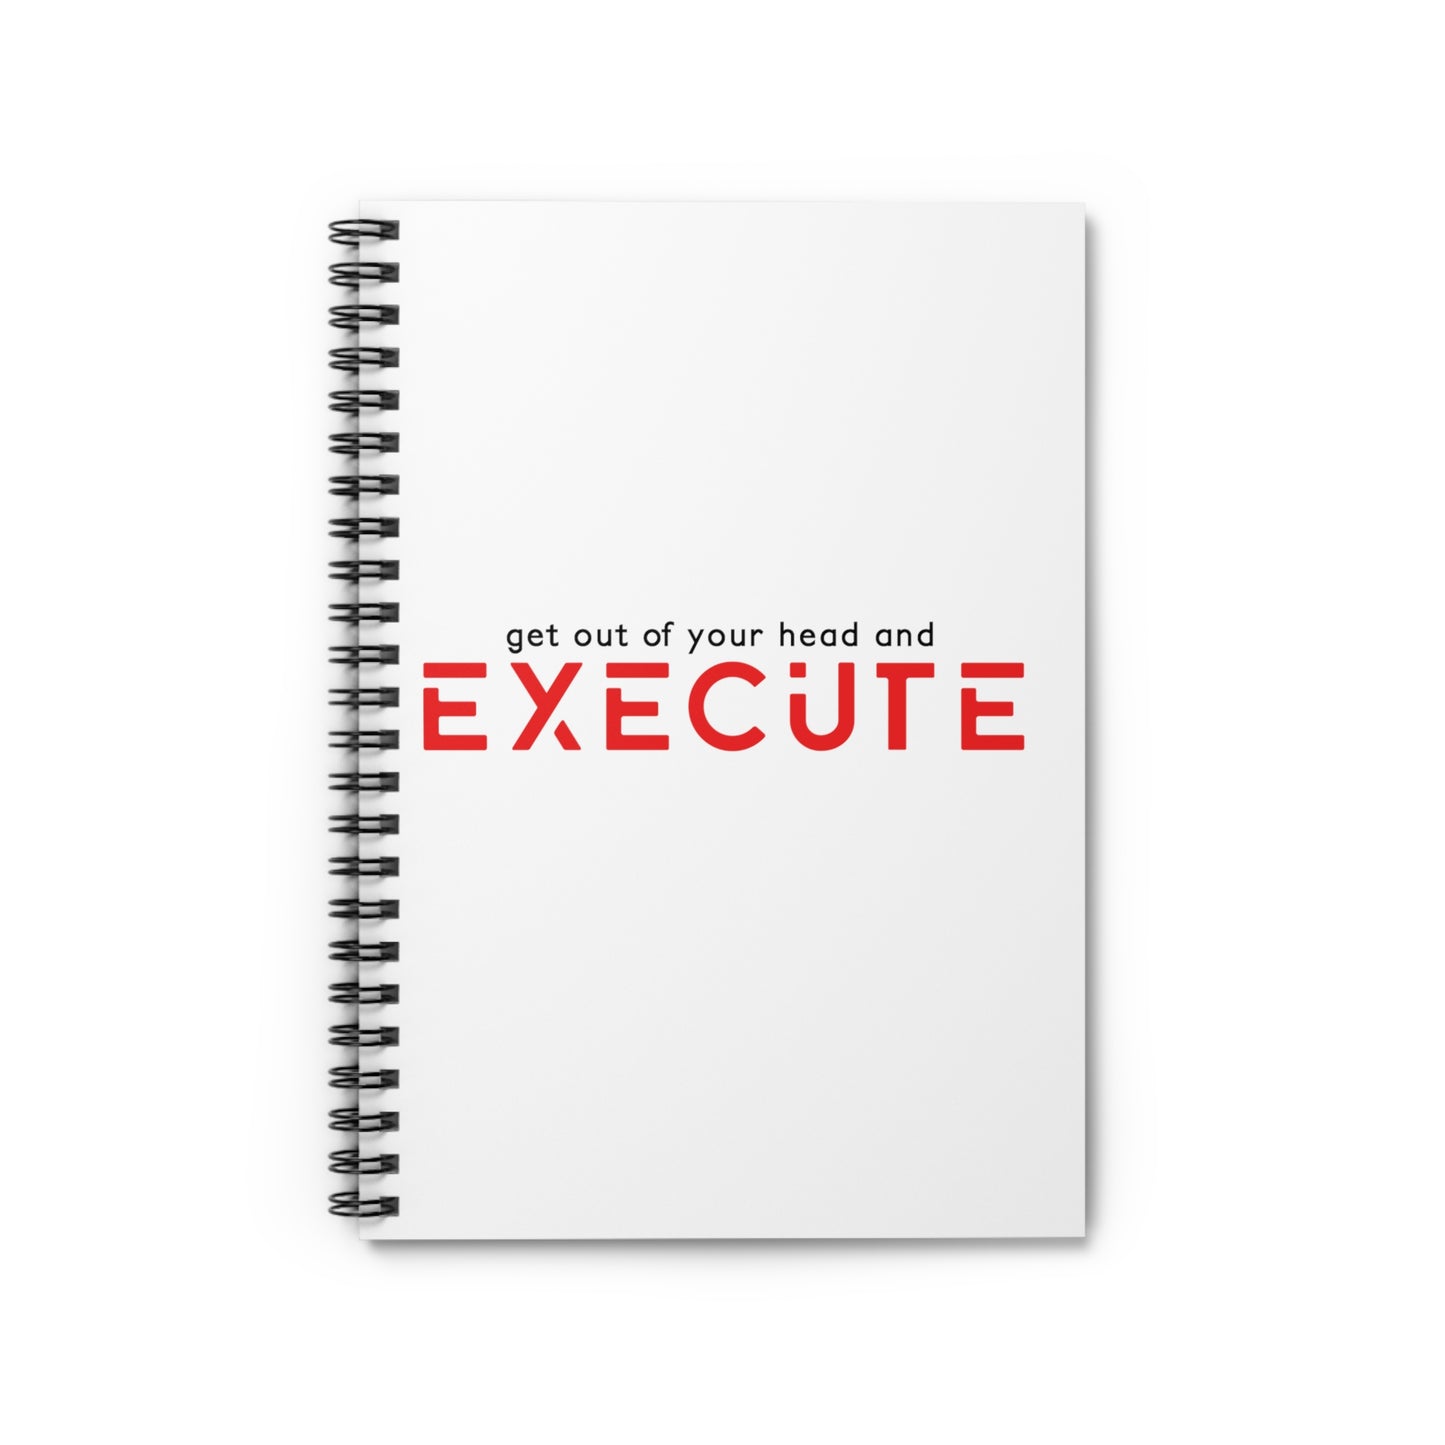 "Execute" Journal